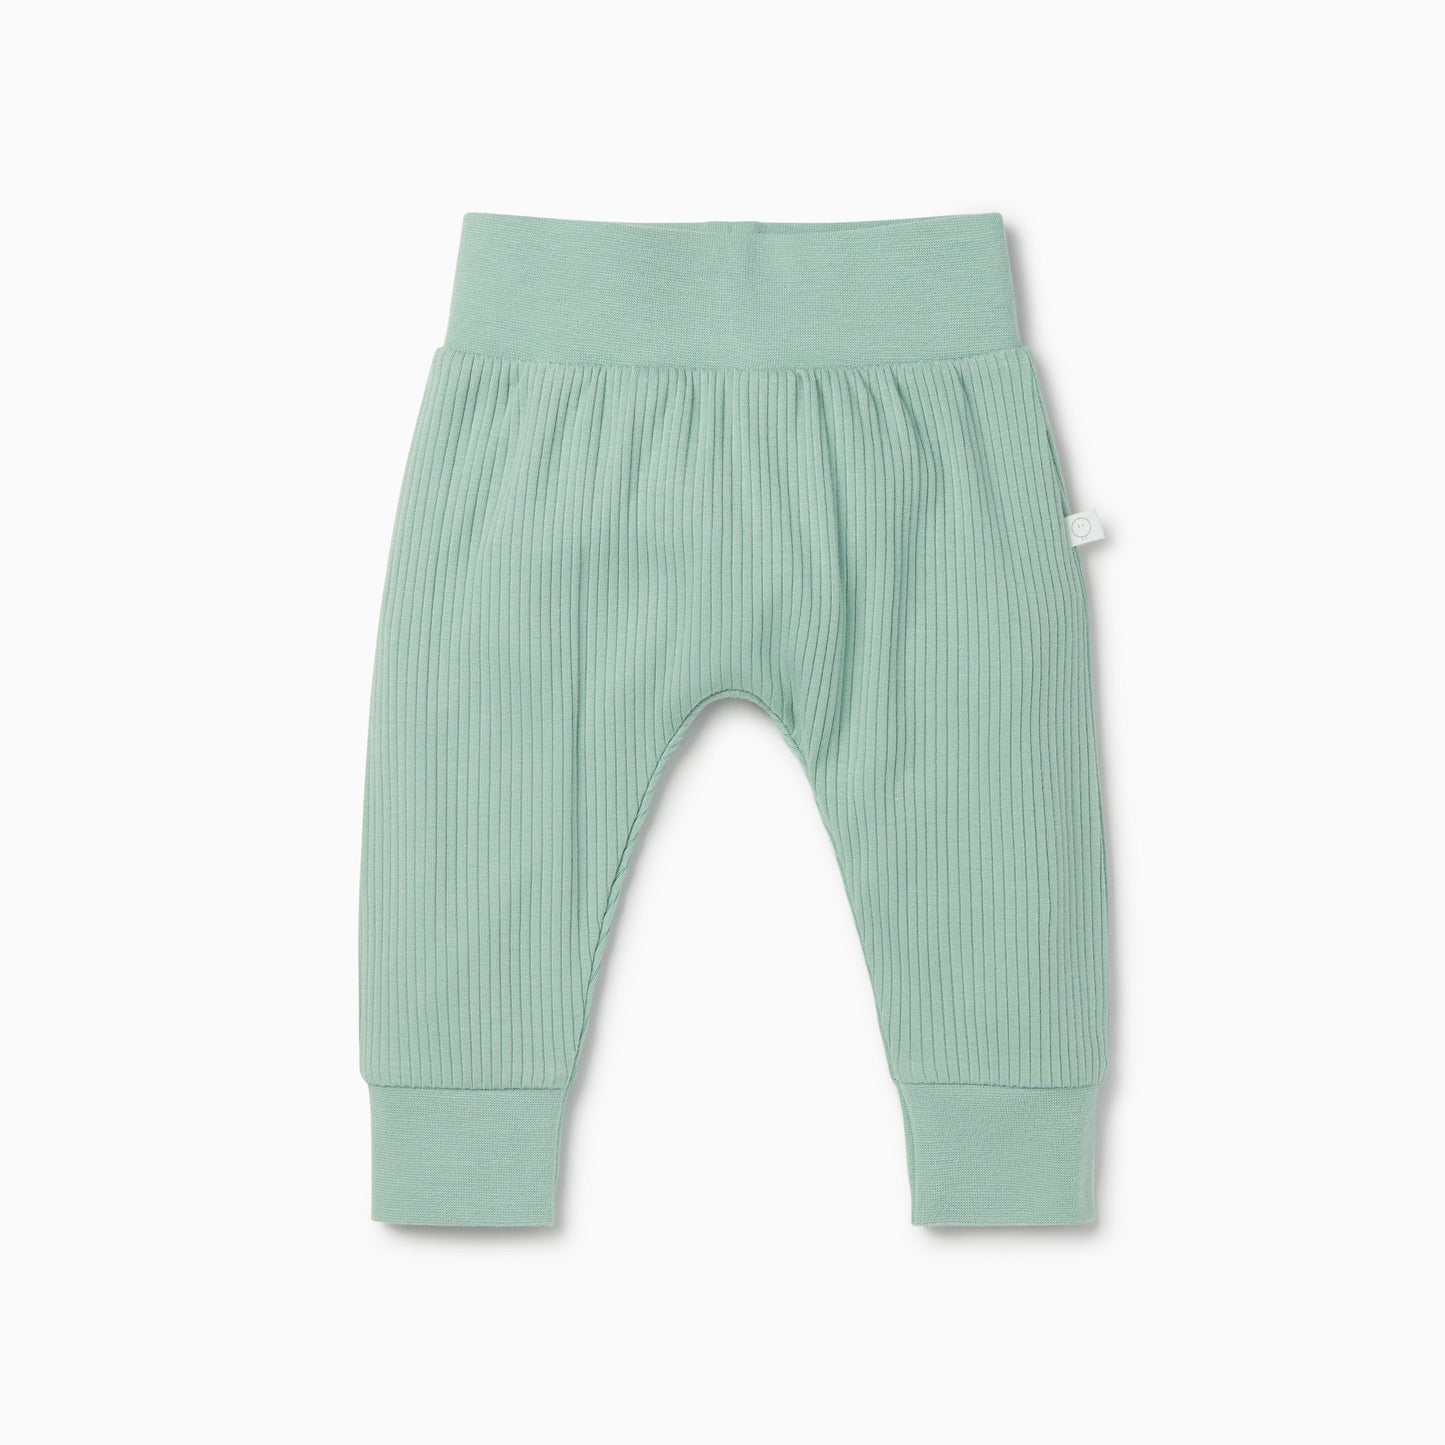 Ribbed comfy joggers in mint